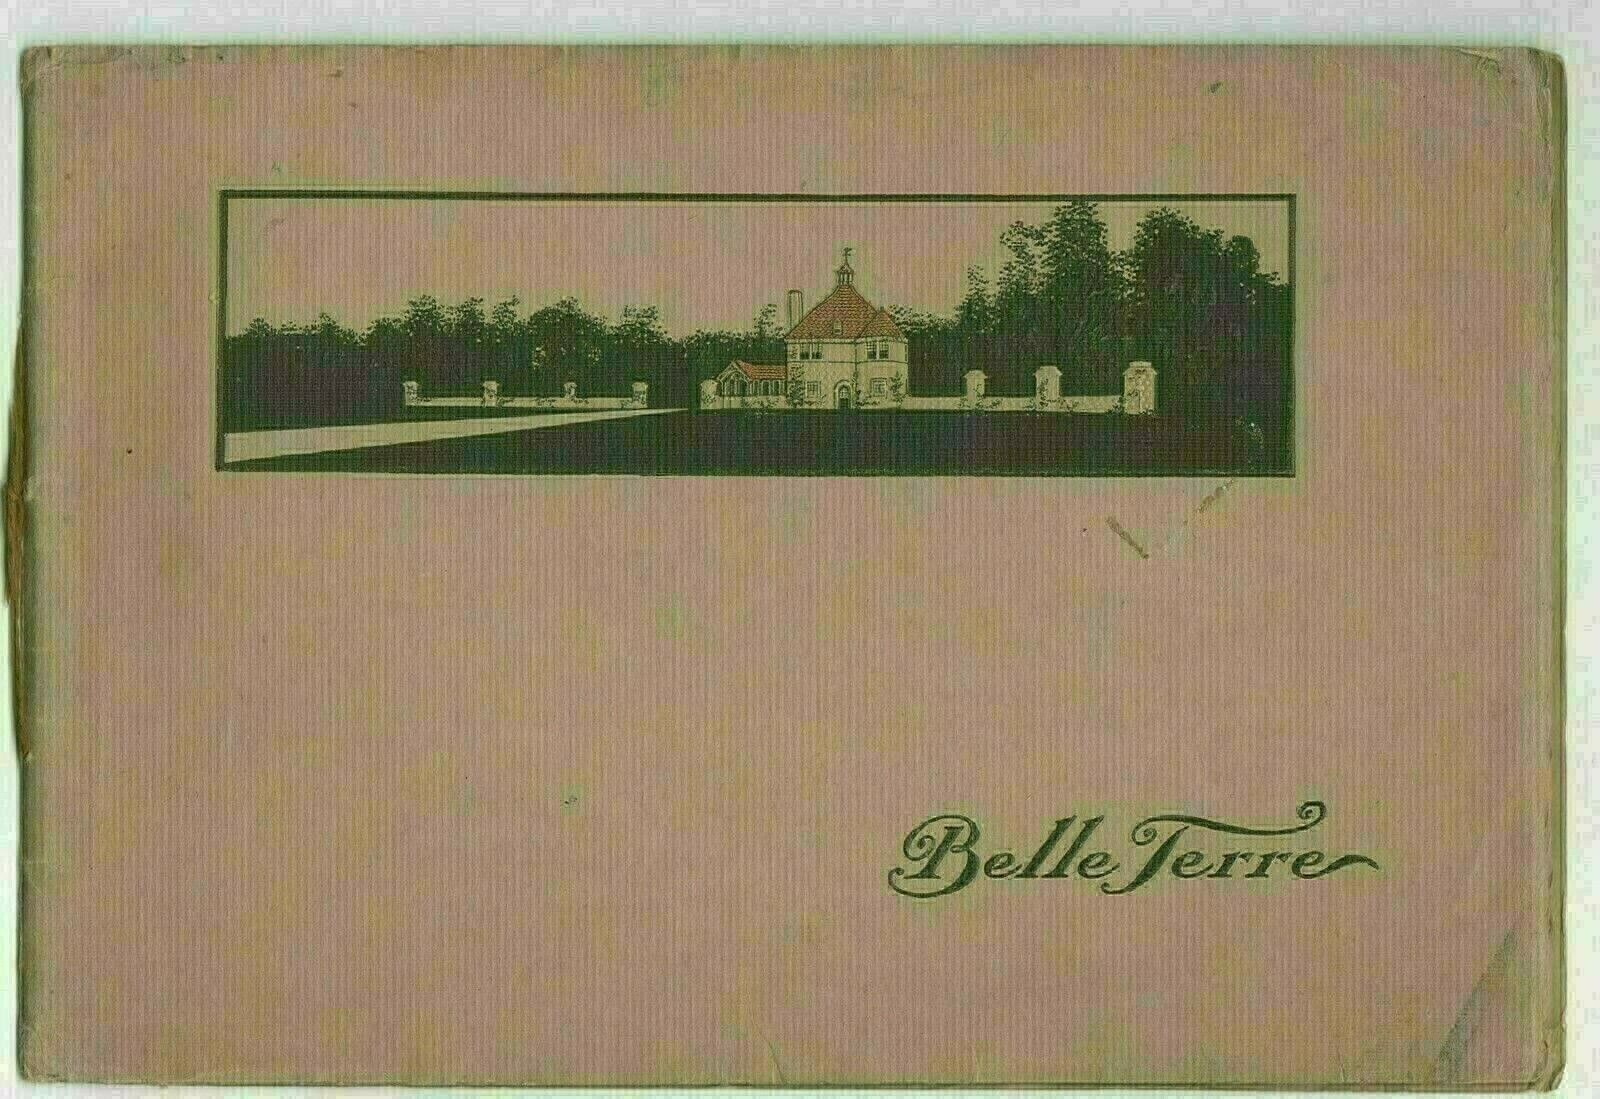 Belle Terre: HOME OF THE BELLE TERRE CLUB Port Jefferson Long Island New York